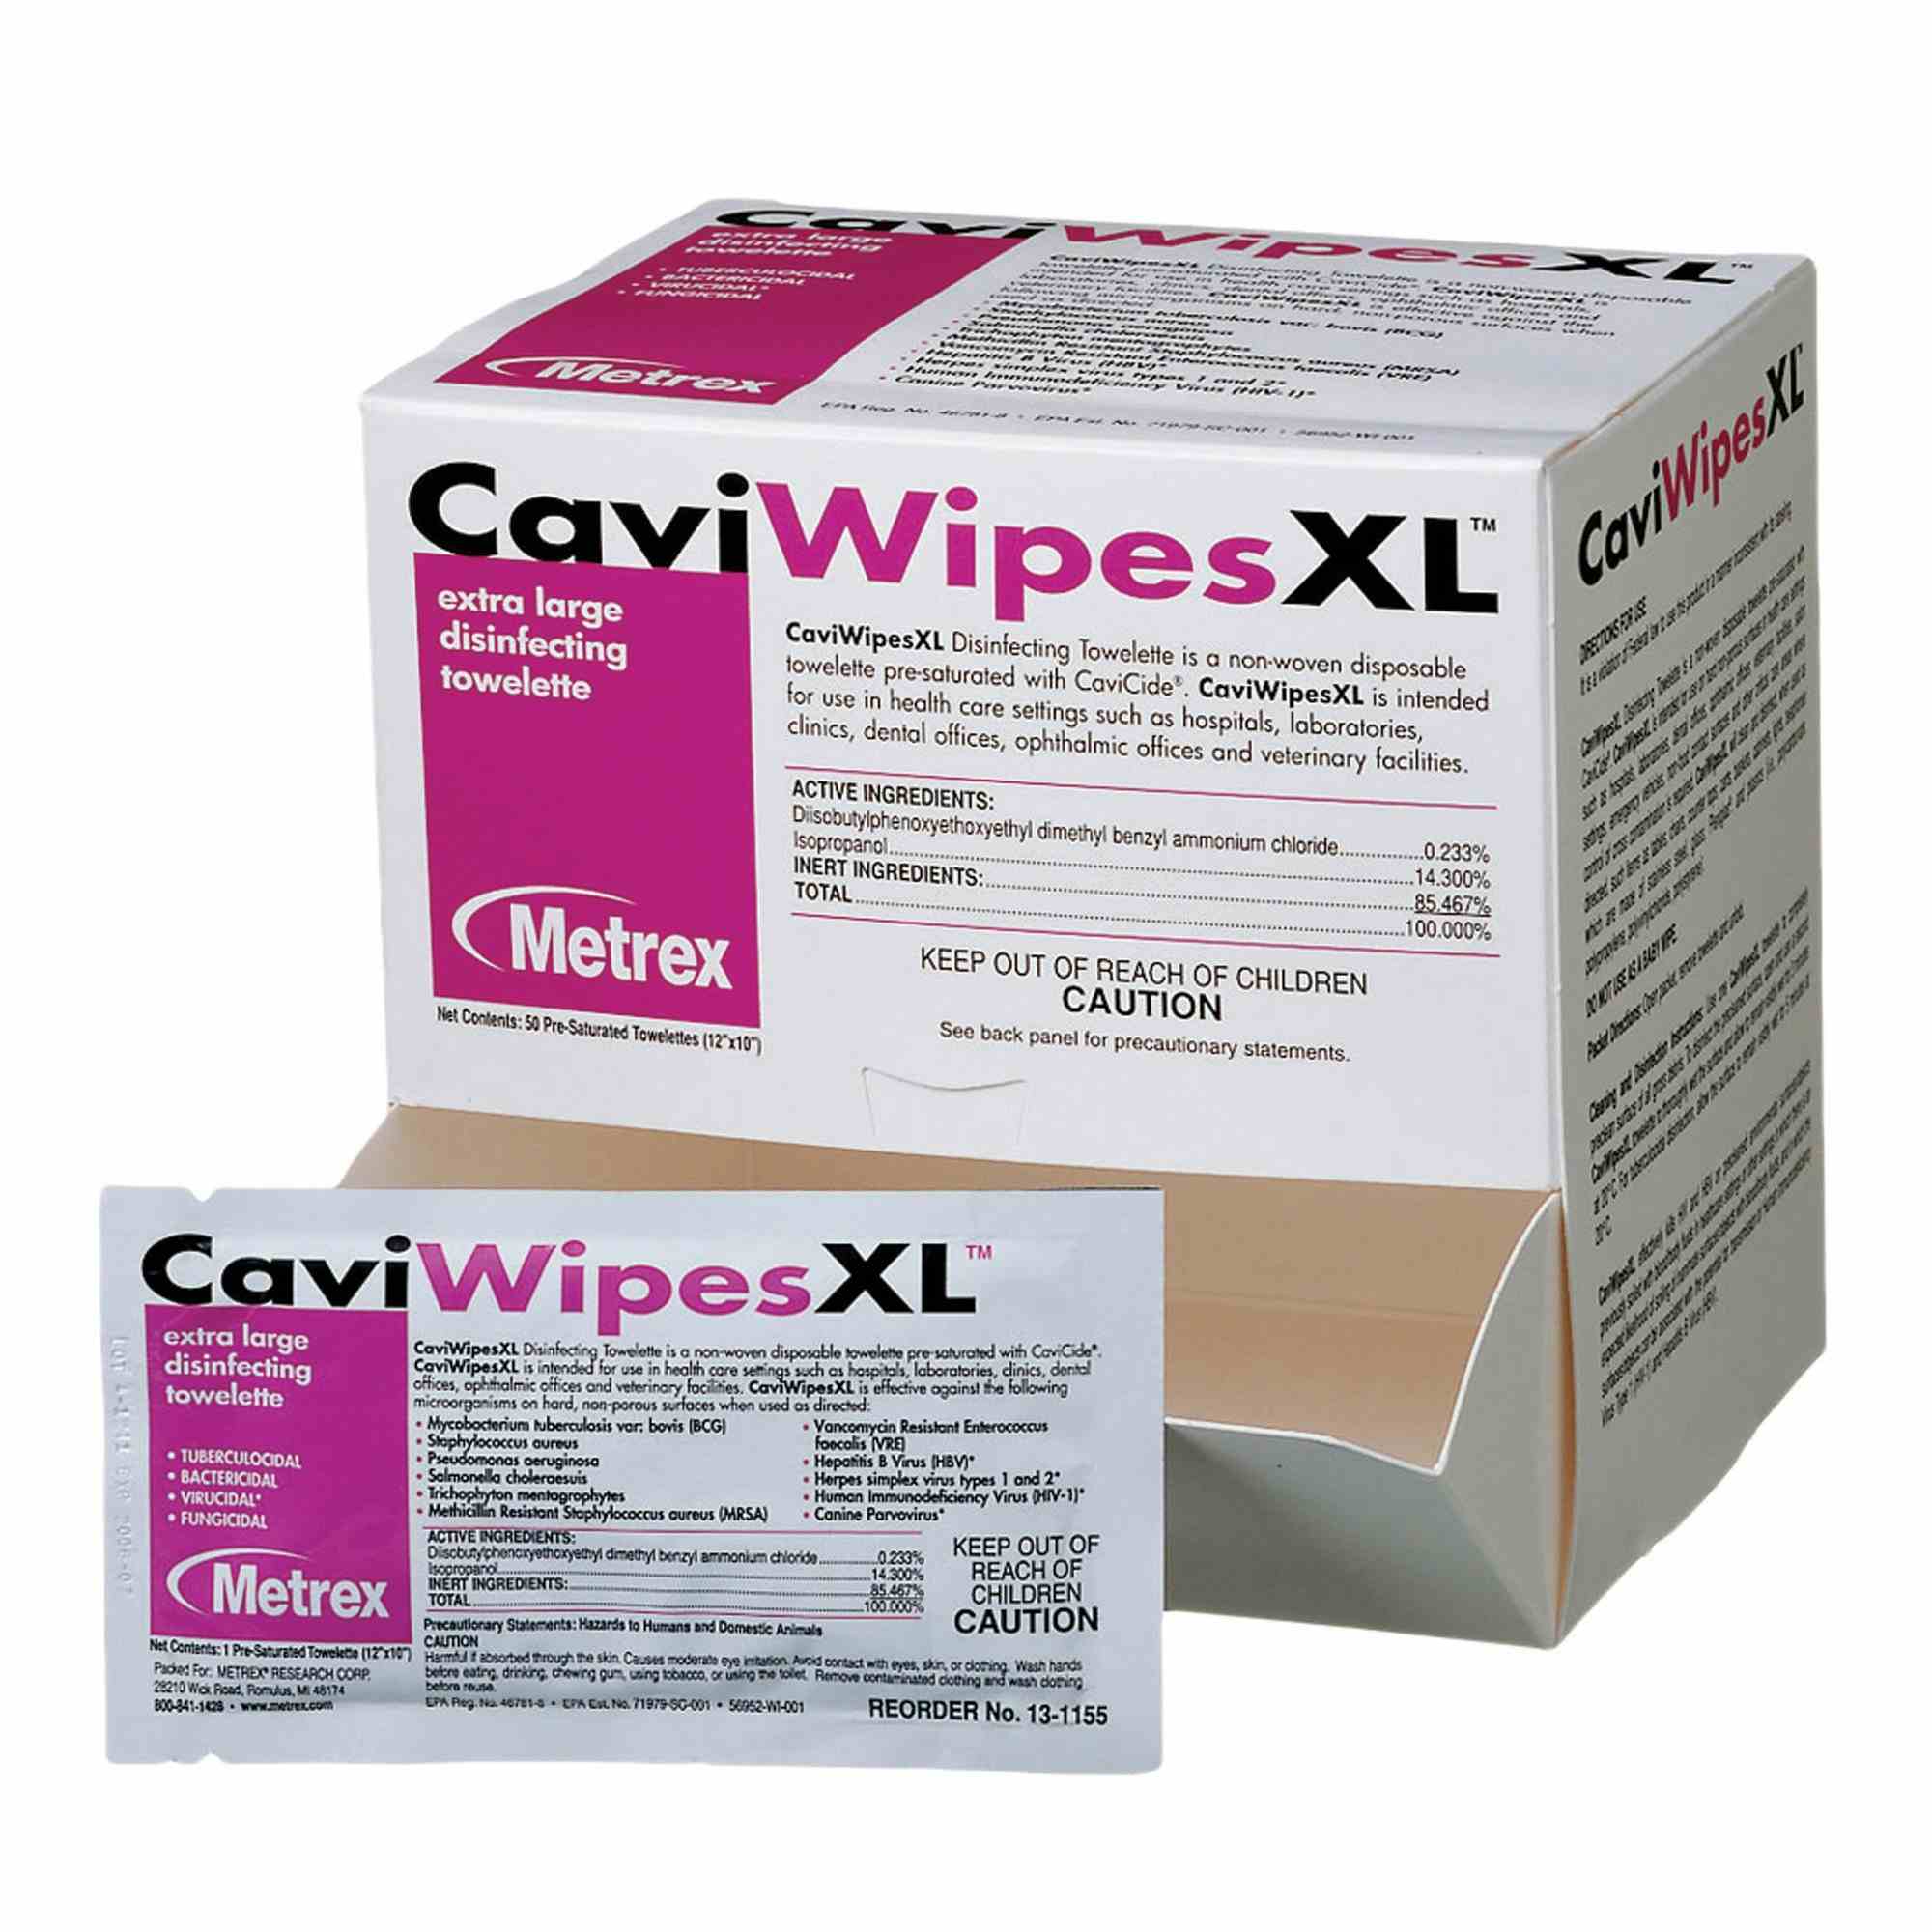 CaviWipesXL Extra Large Disinfecting Towelettes, 13-1155, Box of 50 Packets